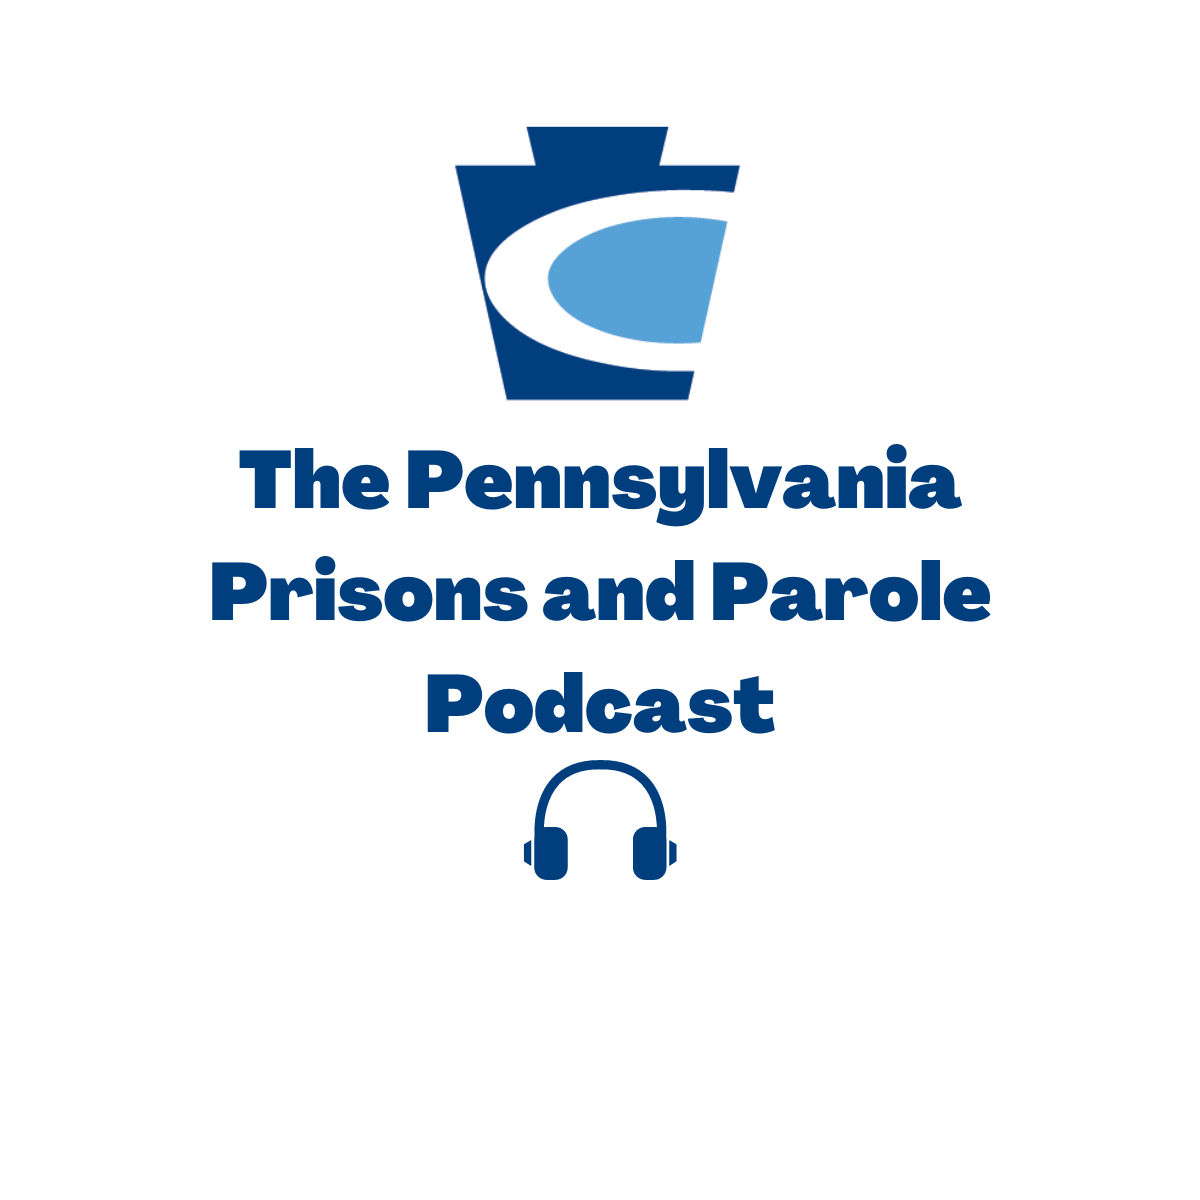 The logo for the PA Prisons and Parole podcast